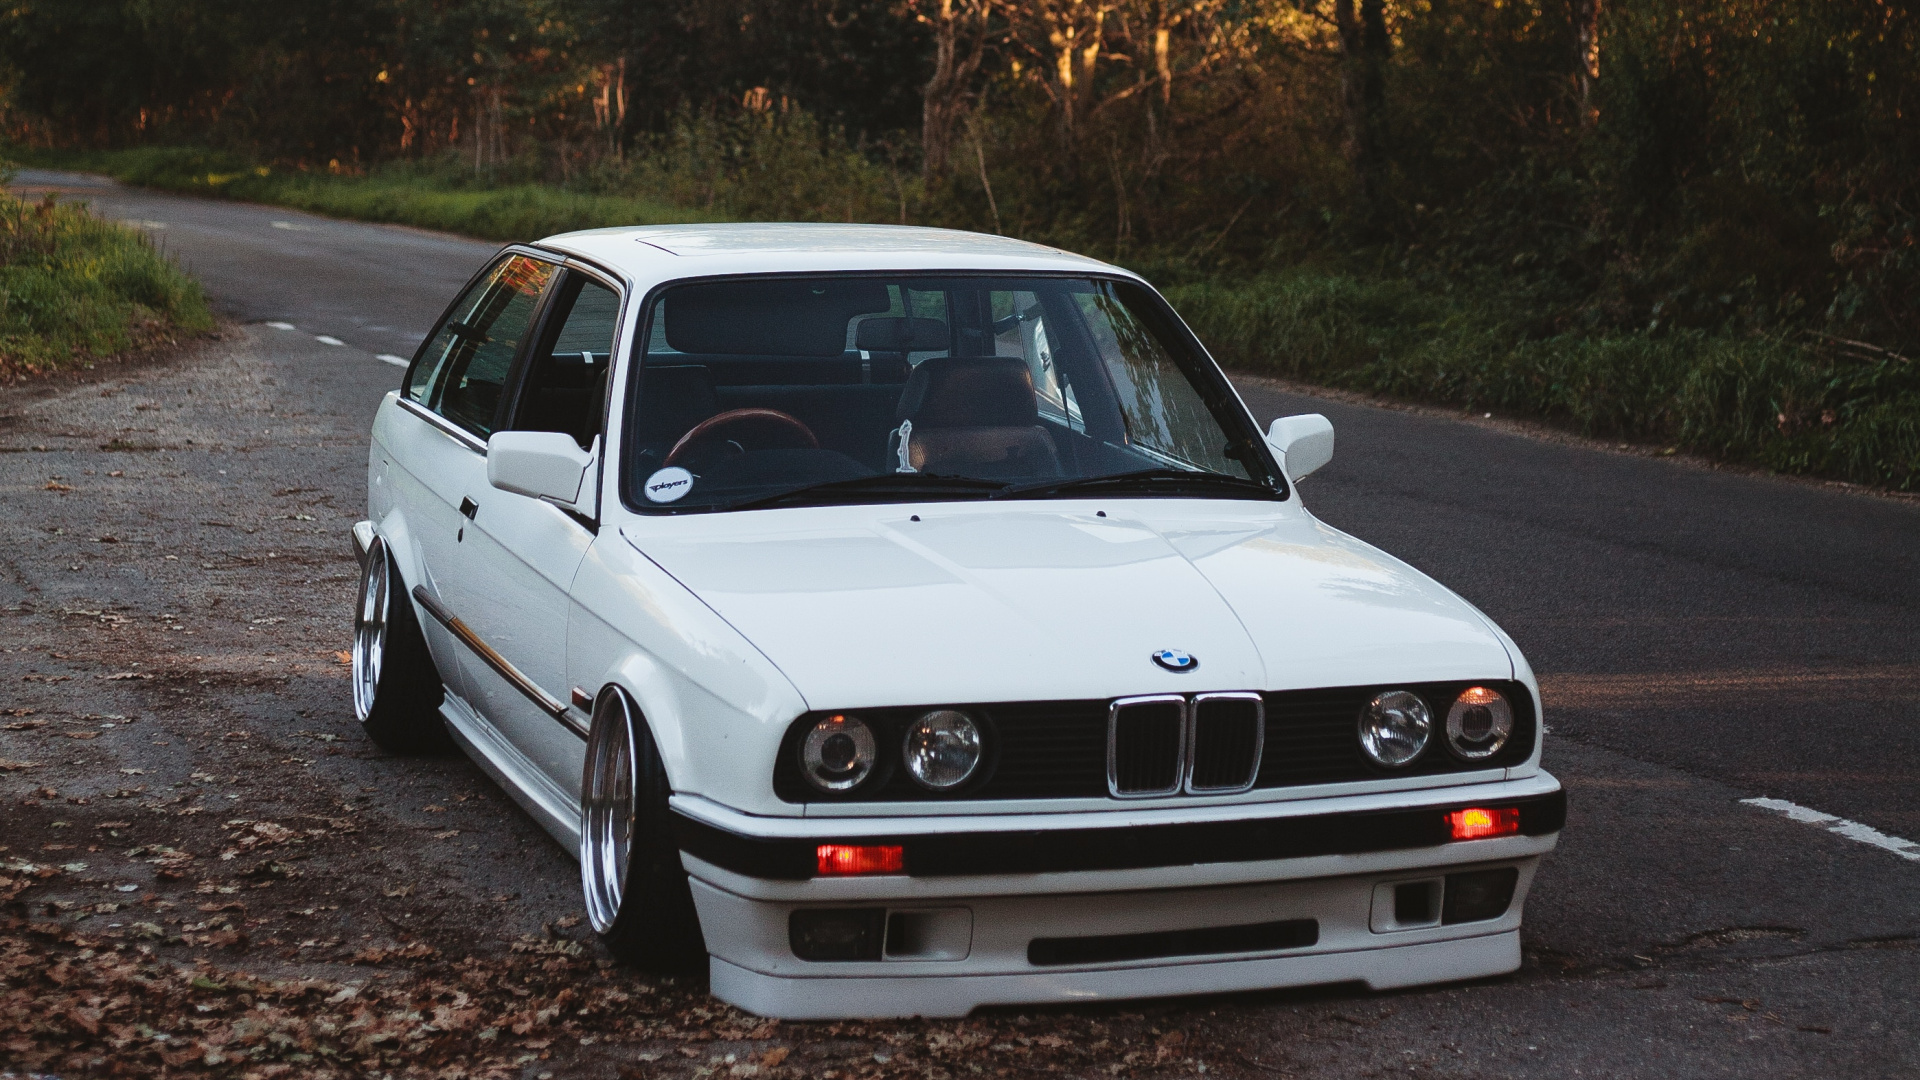 White Bmw m 3 on Road During Daytime. Wallpaper in 1920x1080 Resolution